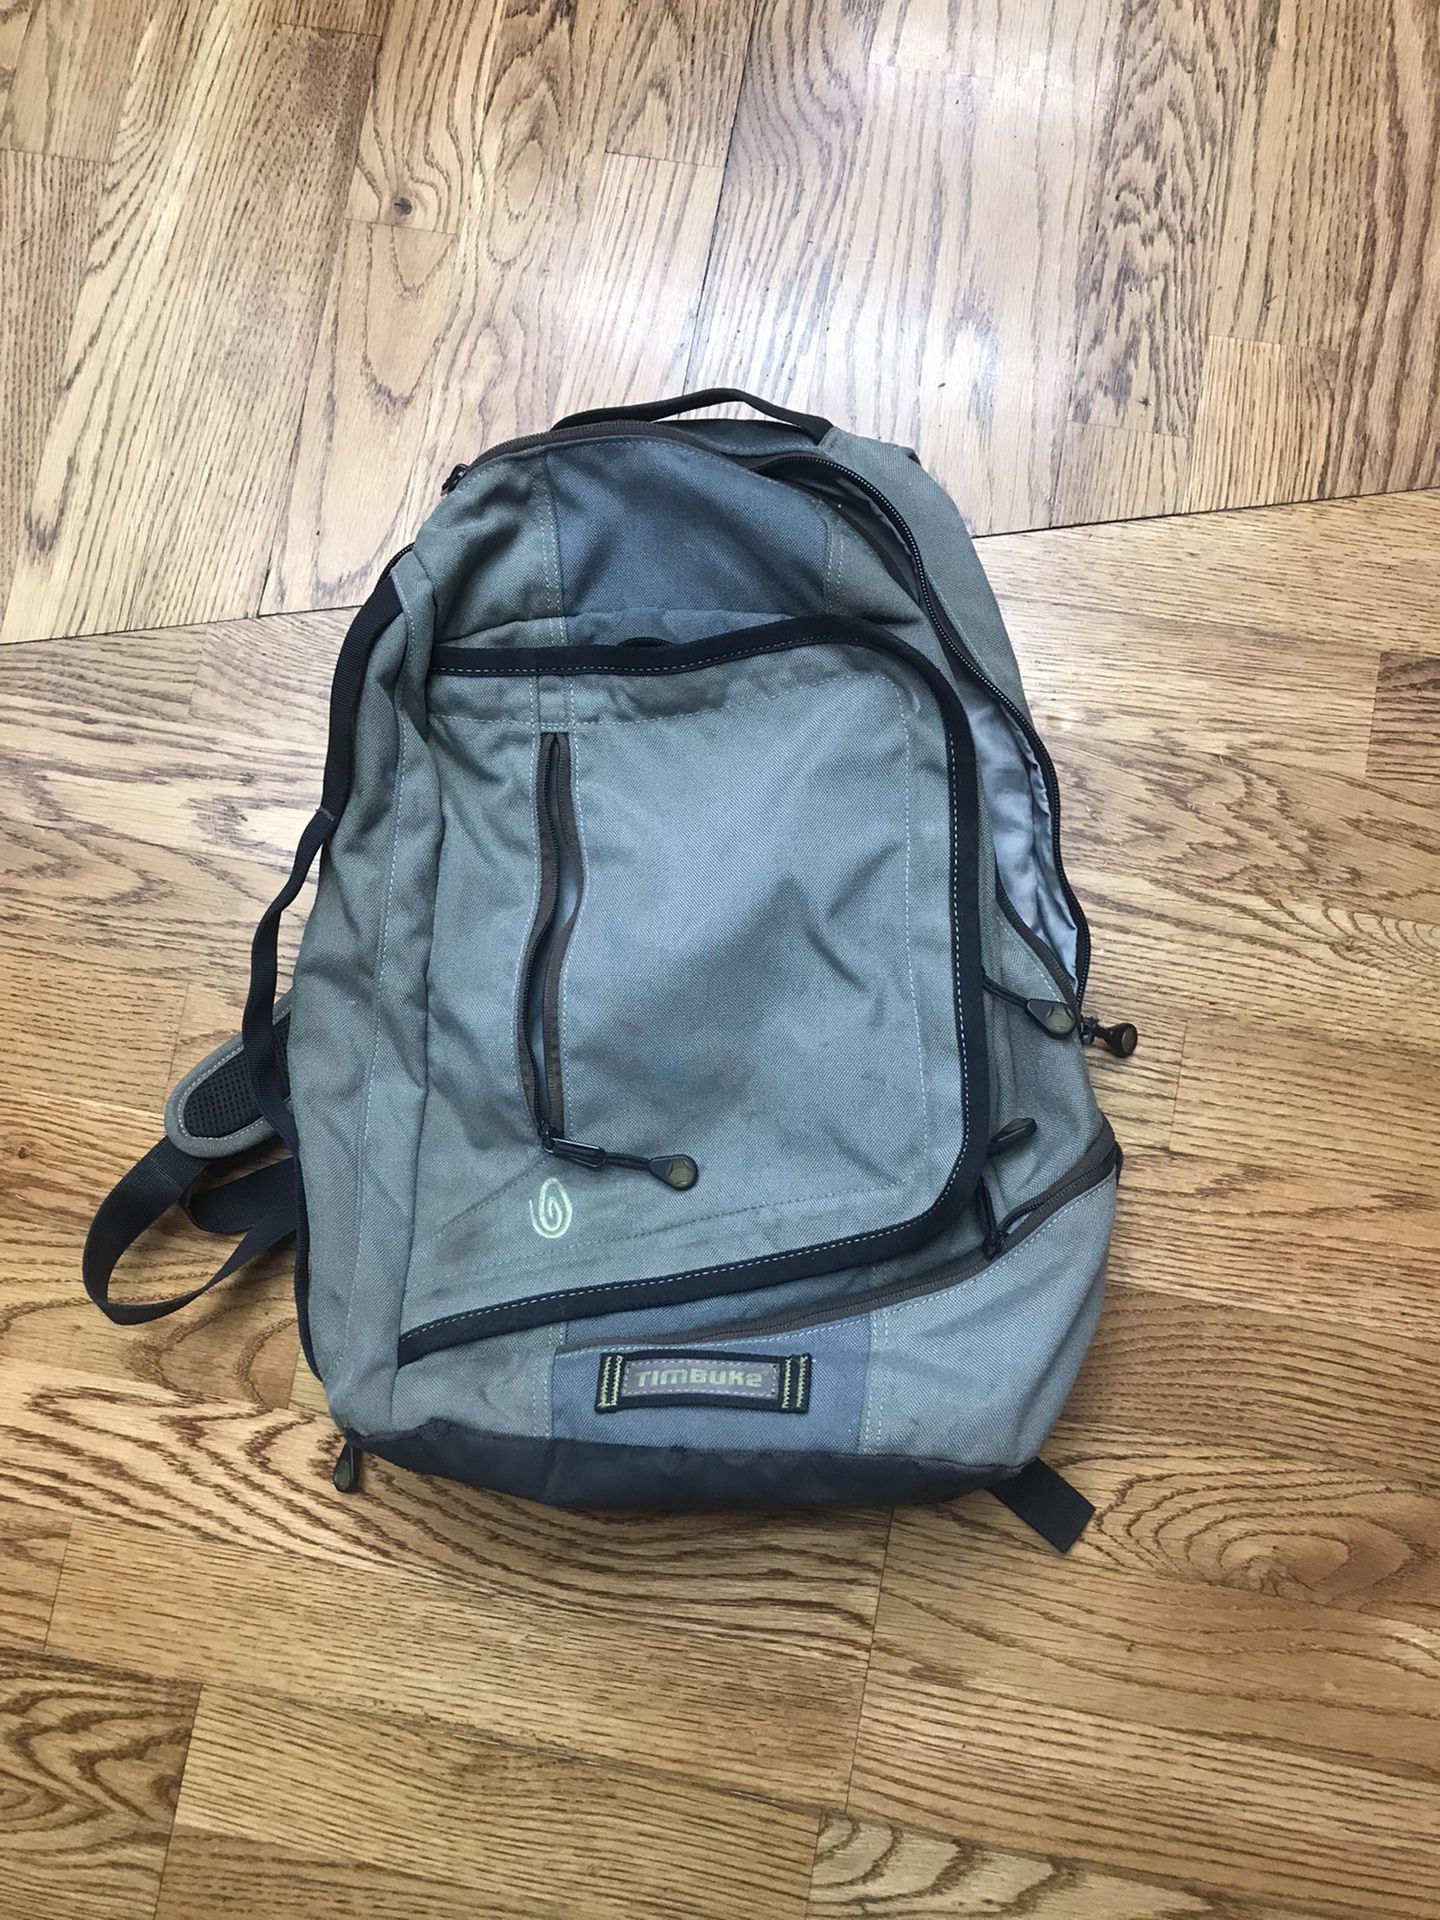 Nice Timbuk2 backpack ( free delivery up to 10 miles)